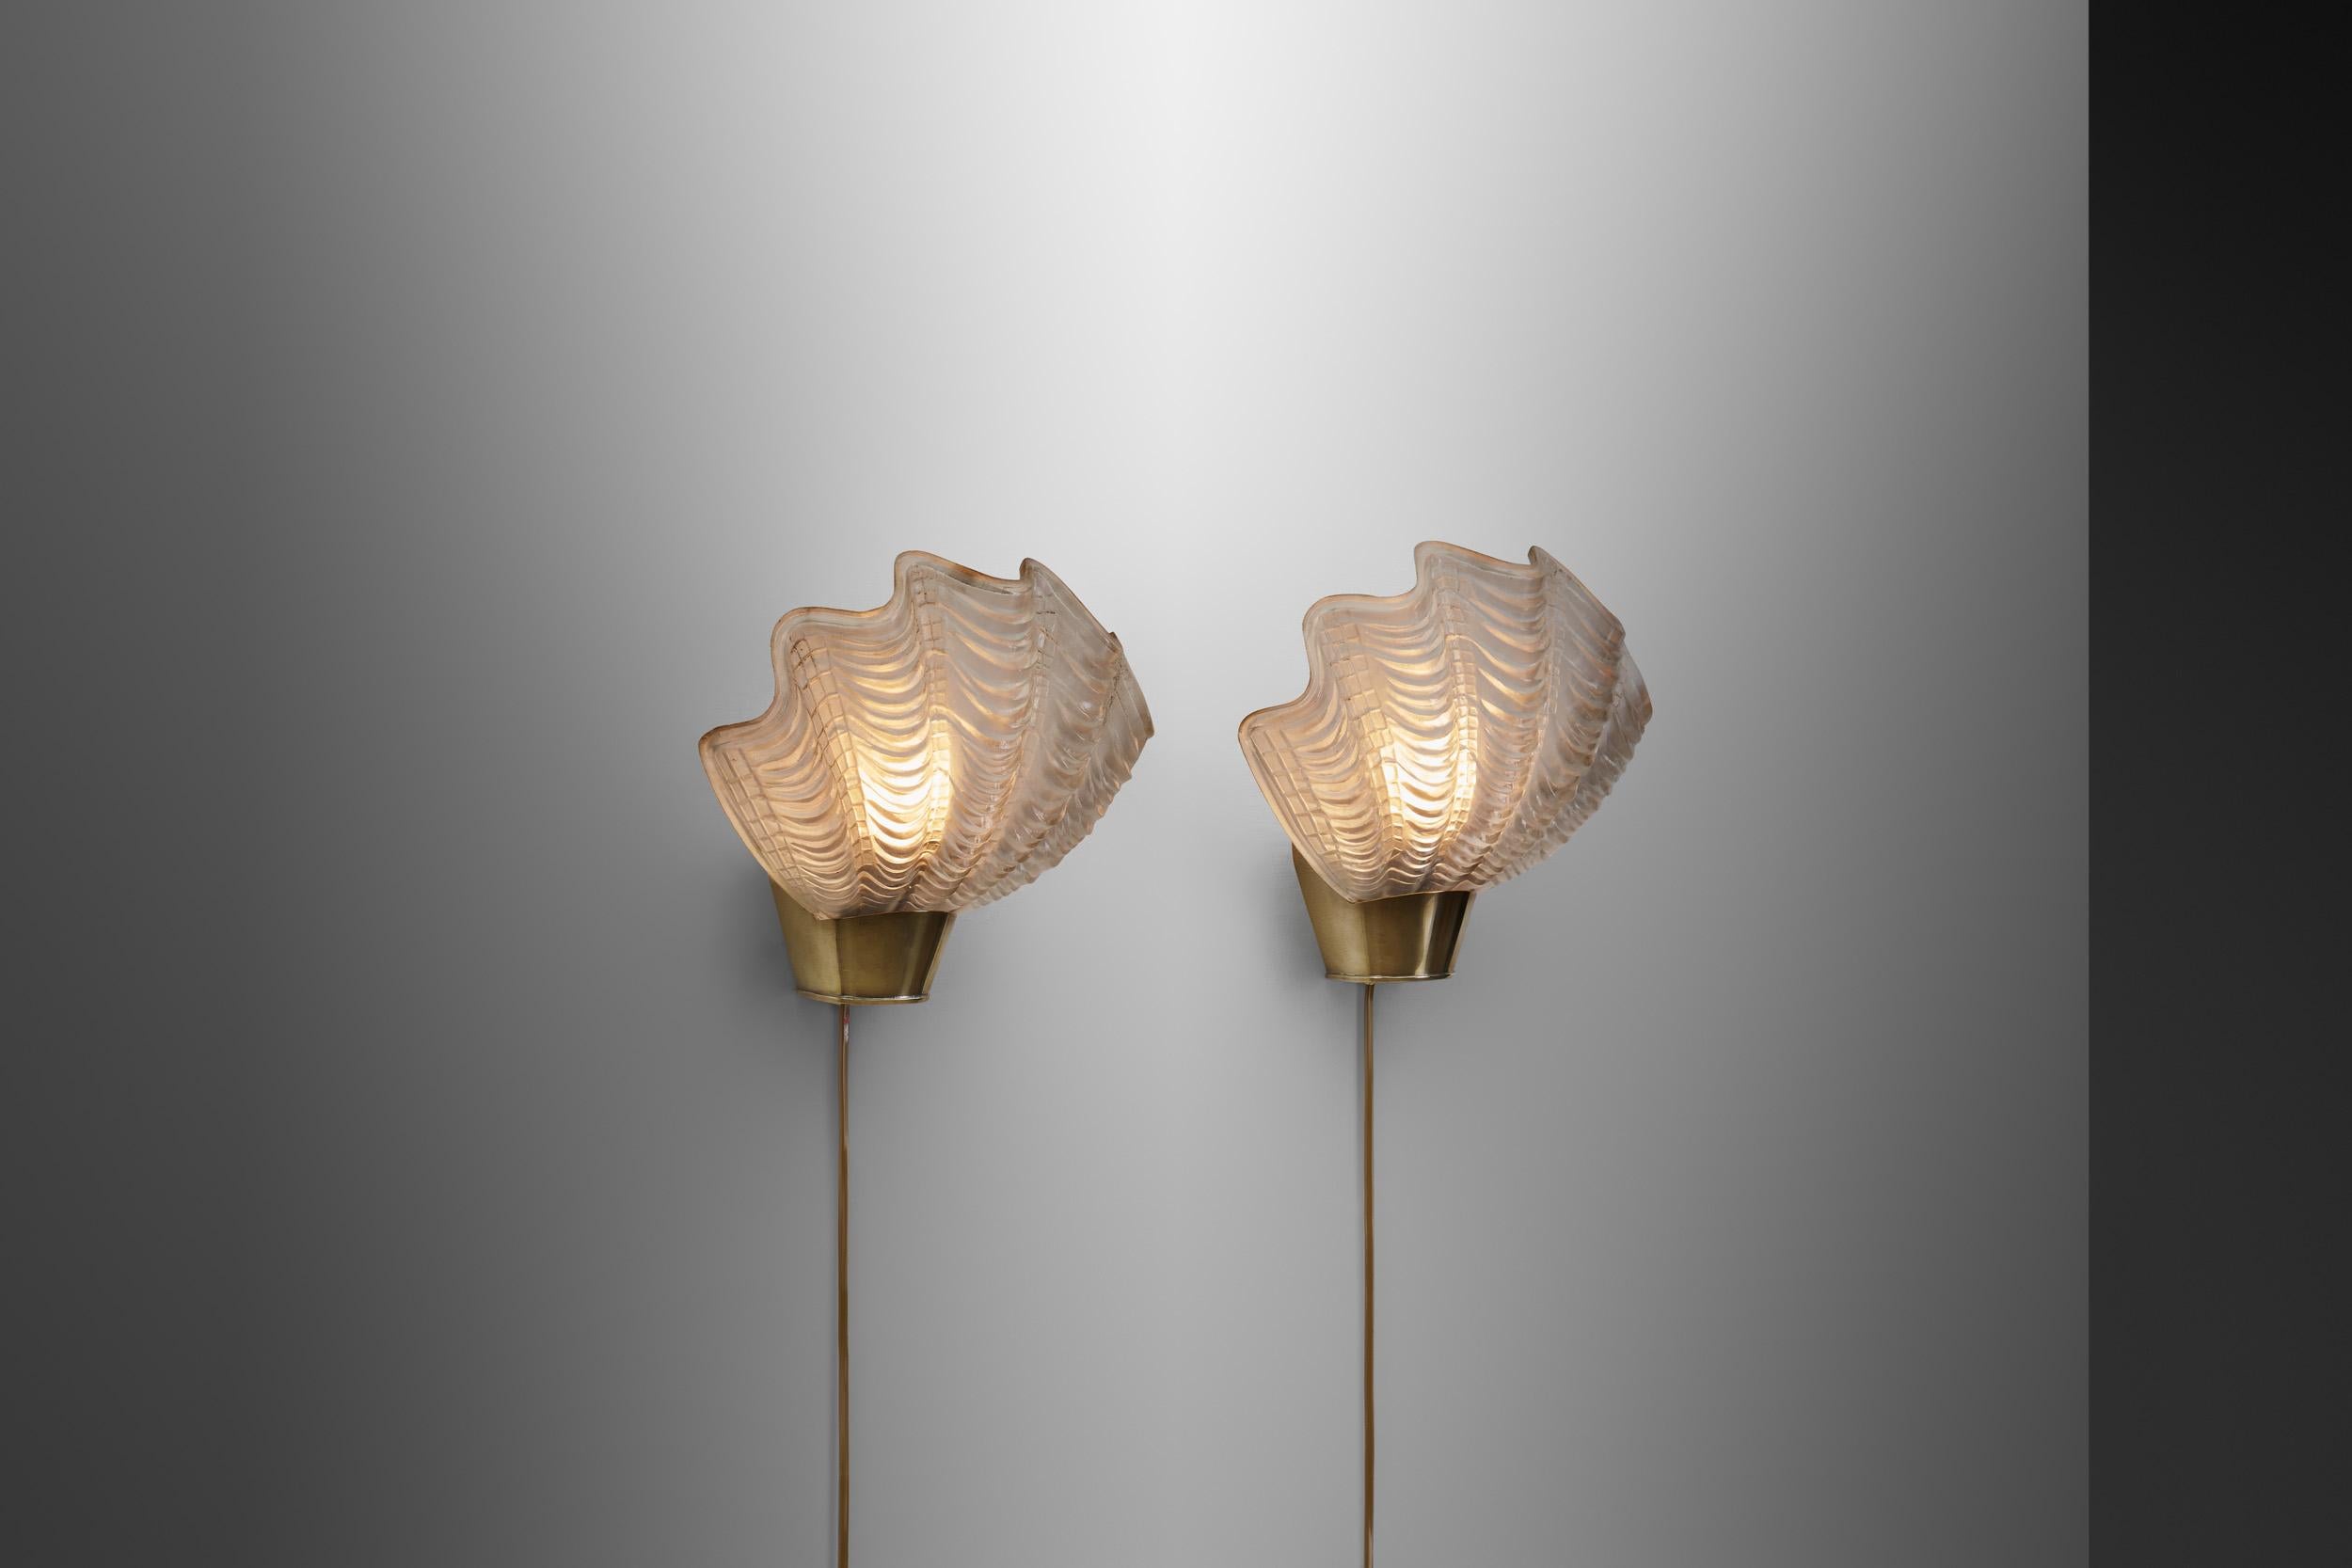 Swedish Modern lighting was directly influenced by ASEA, the historic company that had a decisive influence on how the Swedish electrotechnical industry has developed. Based on the classic pairing of brass and glass, these models have plenty to